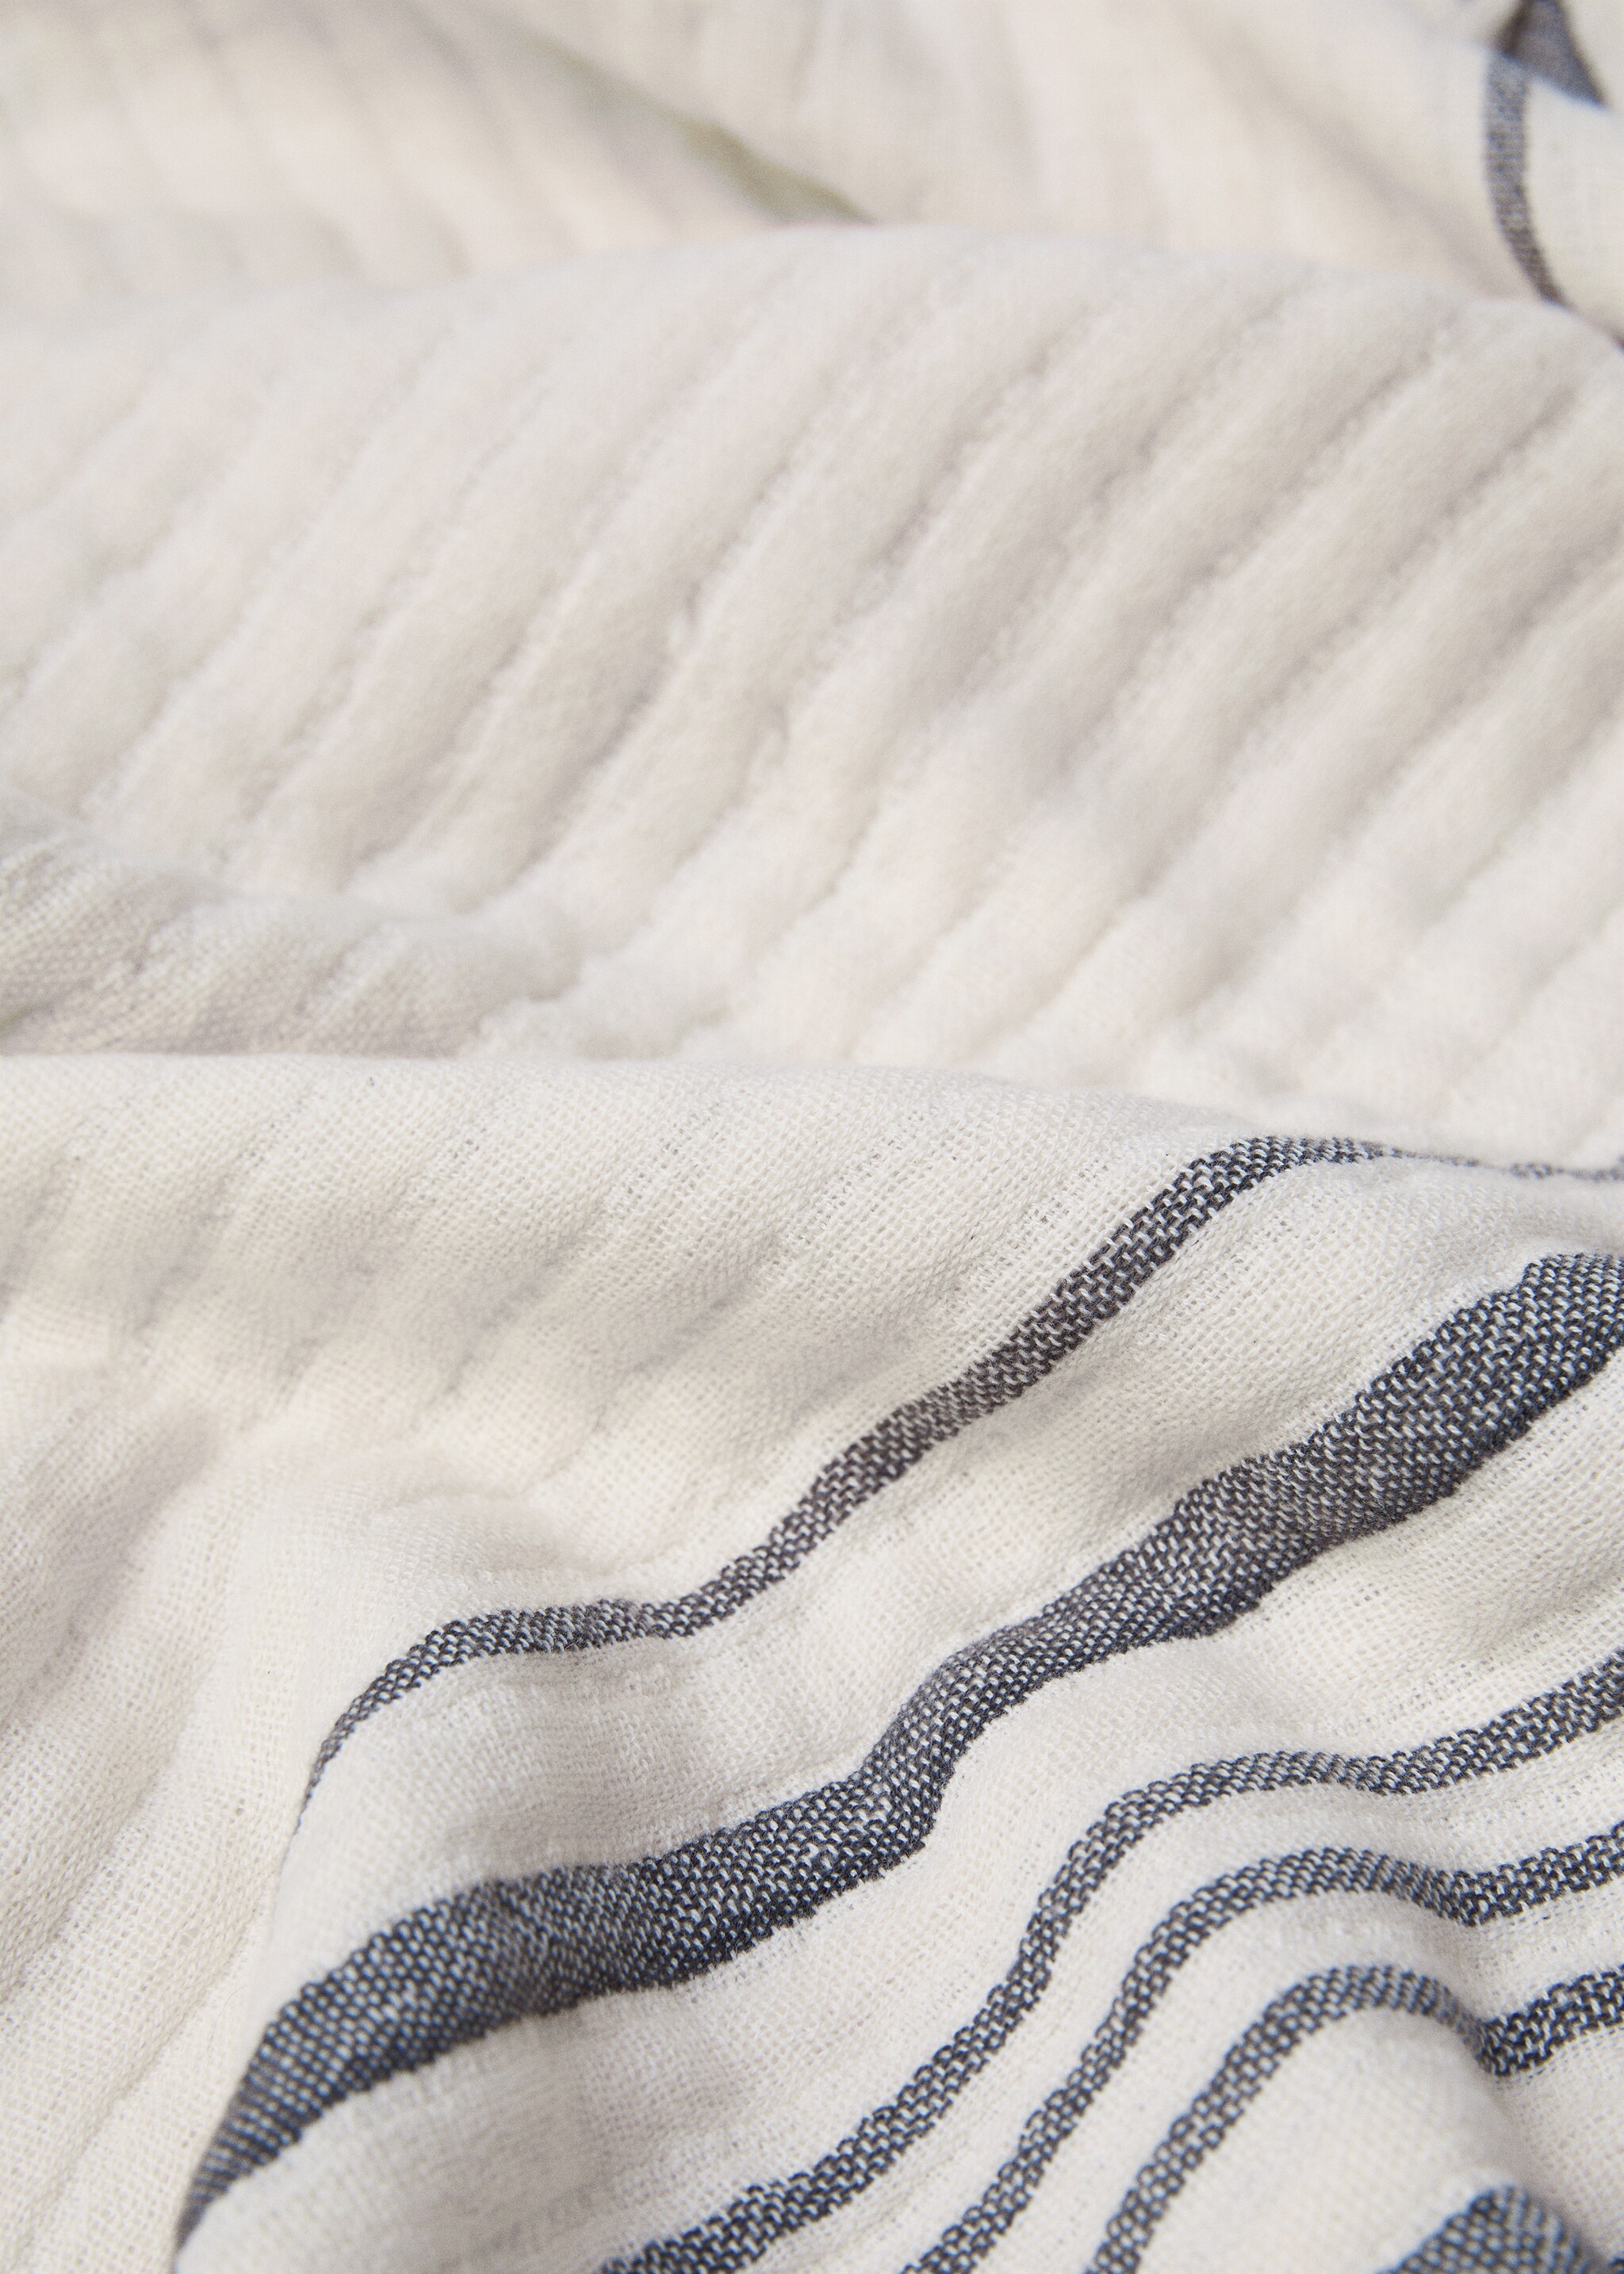 Striped cotton blanket - Details of the article 1